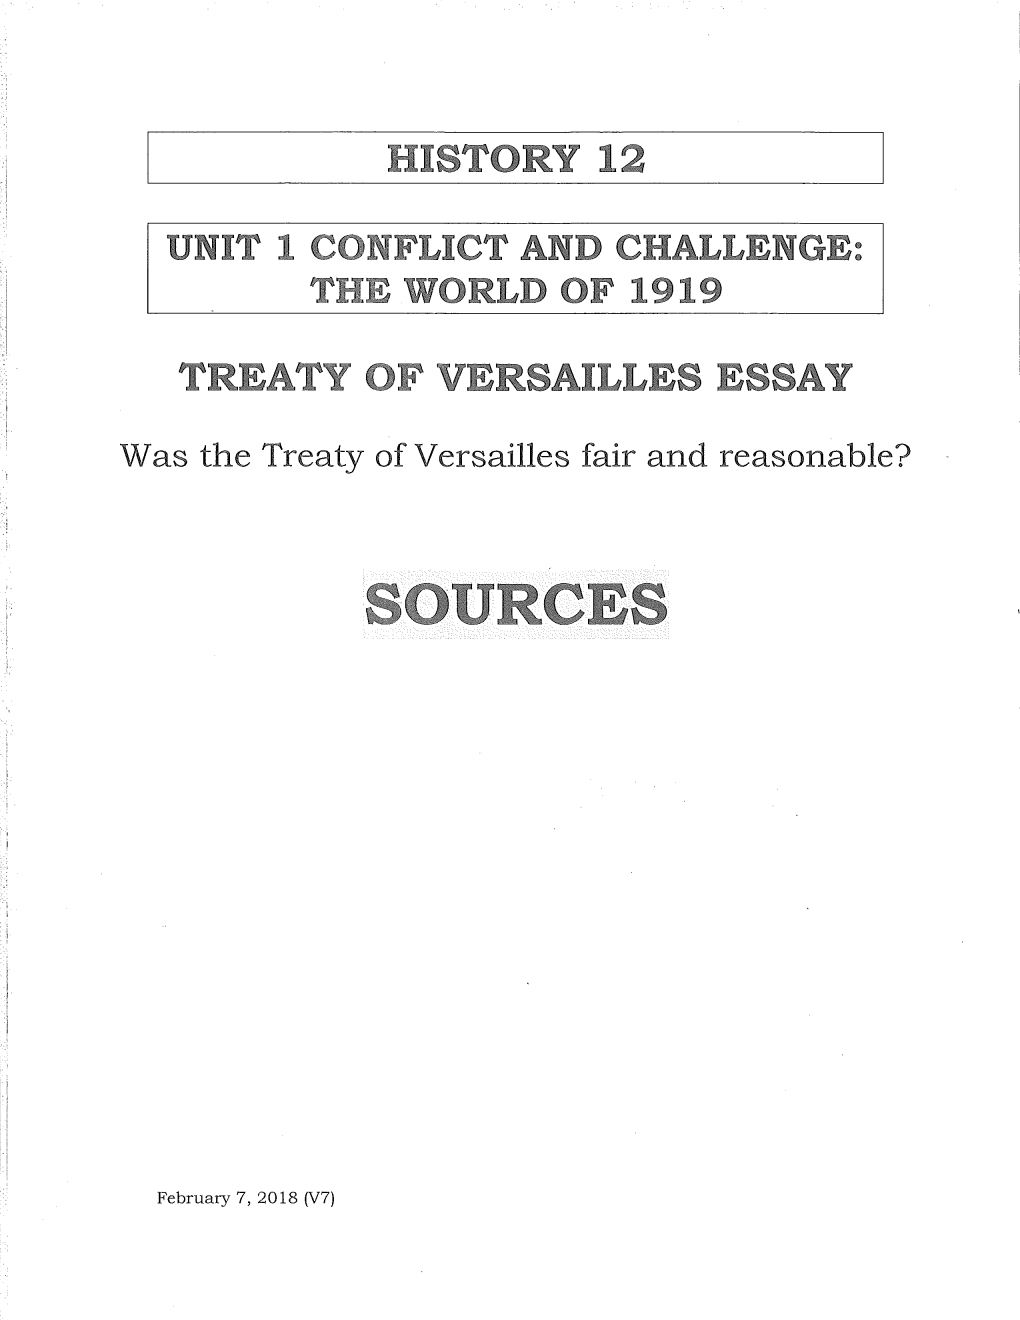 Was the Treaty of Versailles Fair and Reasonable?